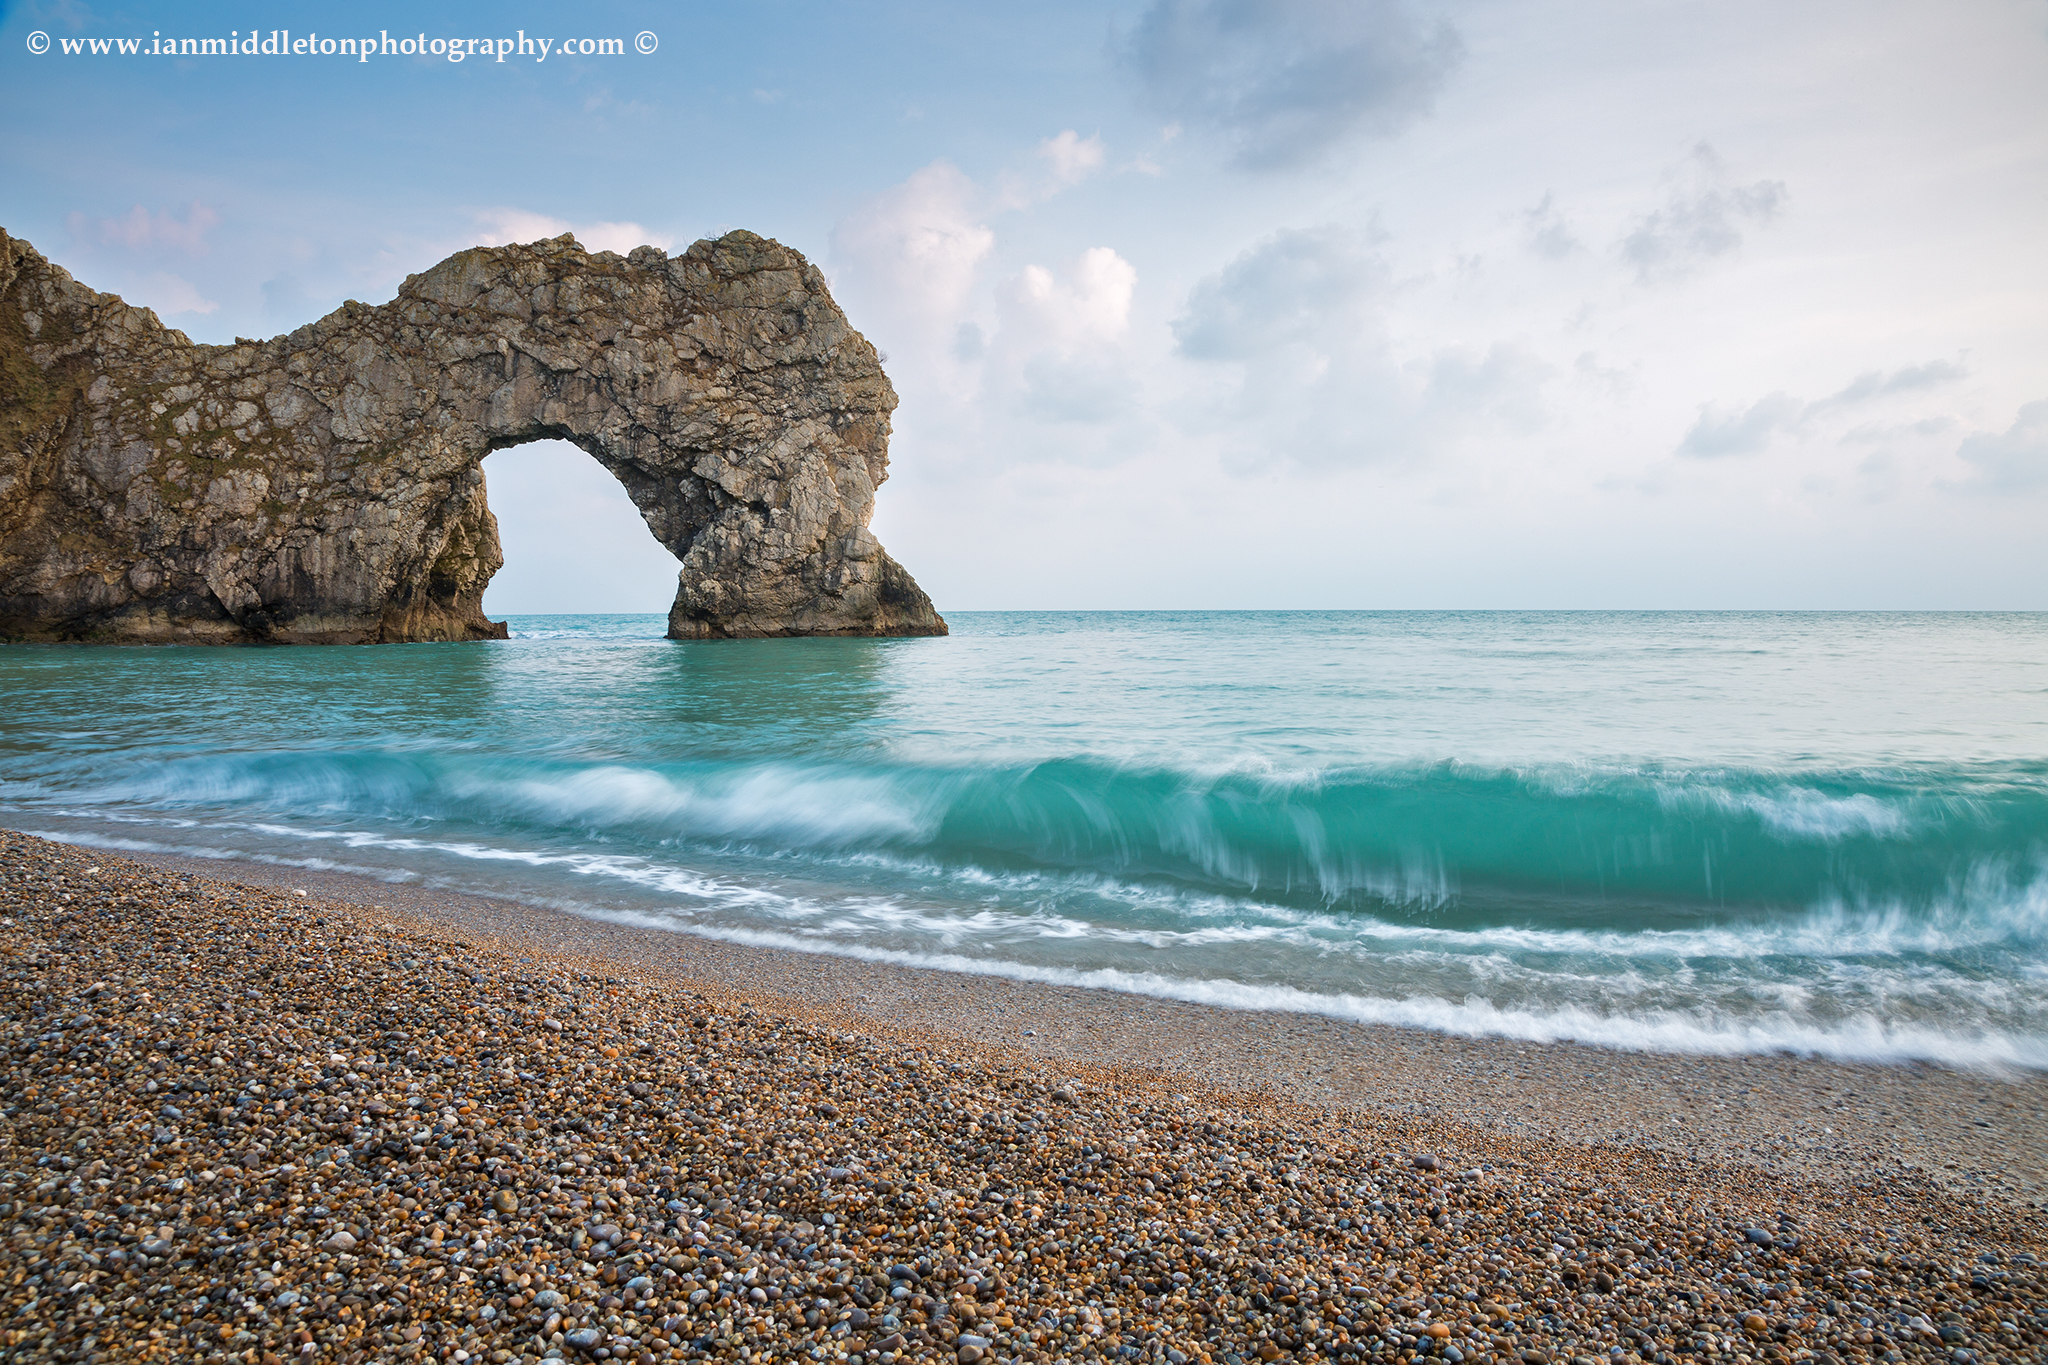 The late afternoon sun casts a warm glow over Durdle Door rock arch and beach, Dorset, England. Durdle door is one of the many stunning locations to visit on the Jurassic coast in southern England.